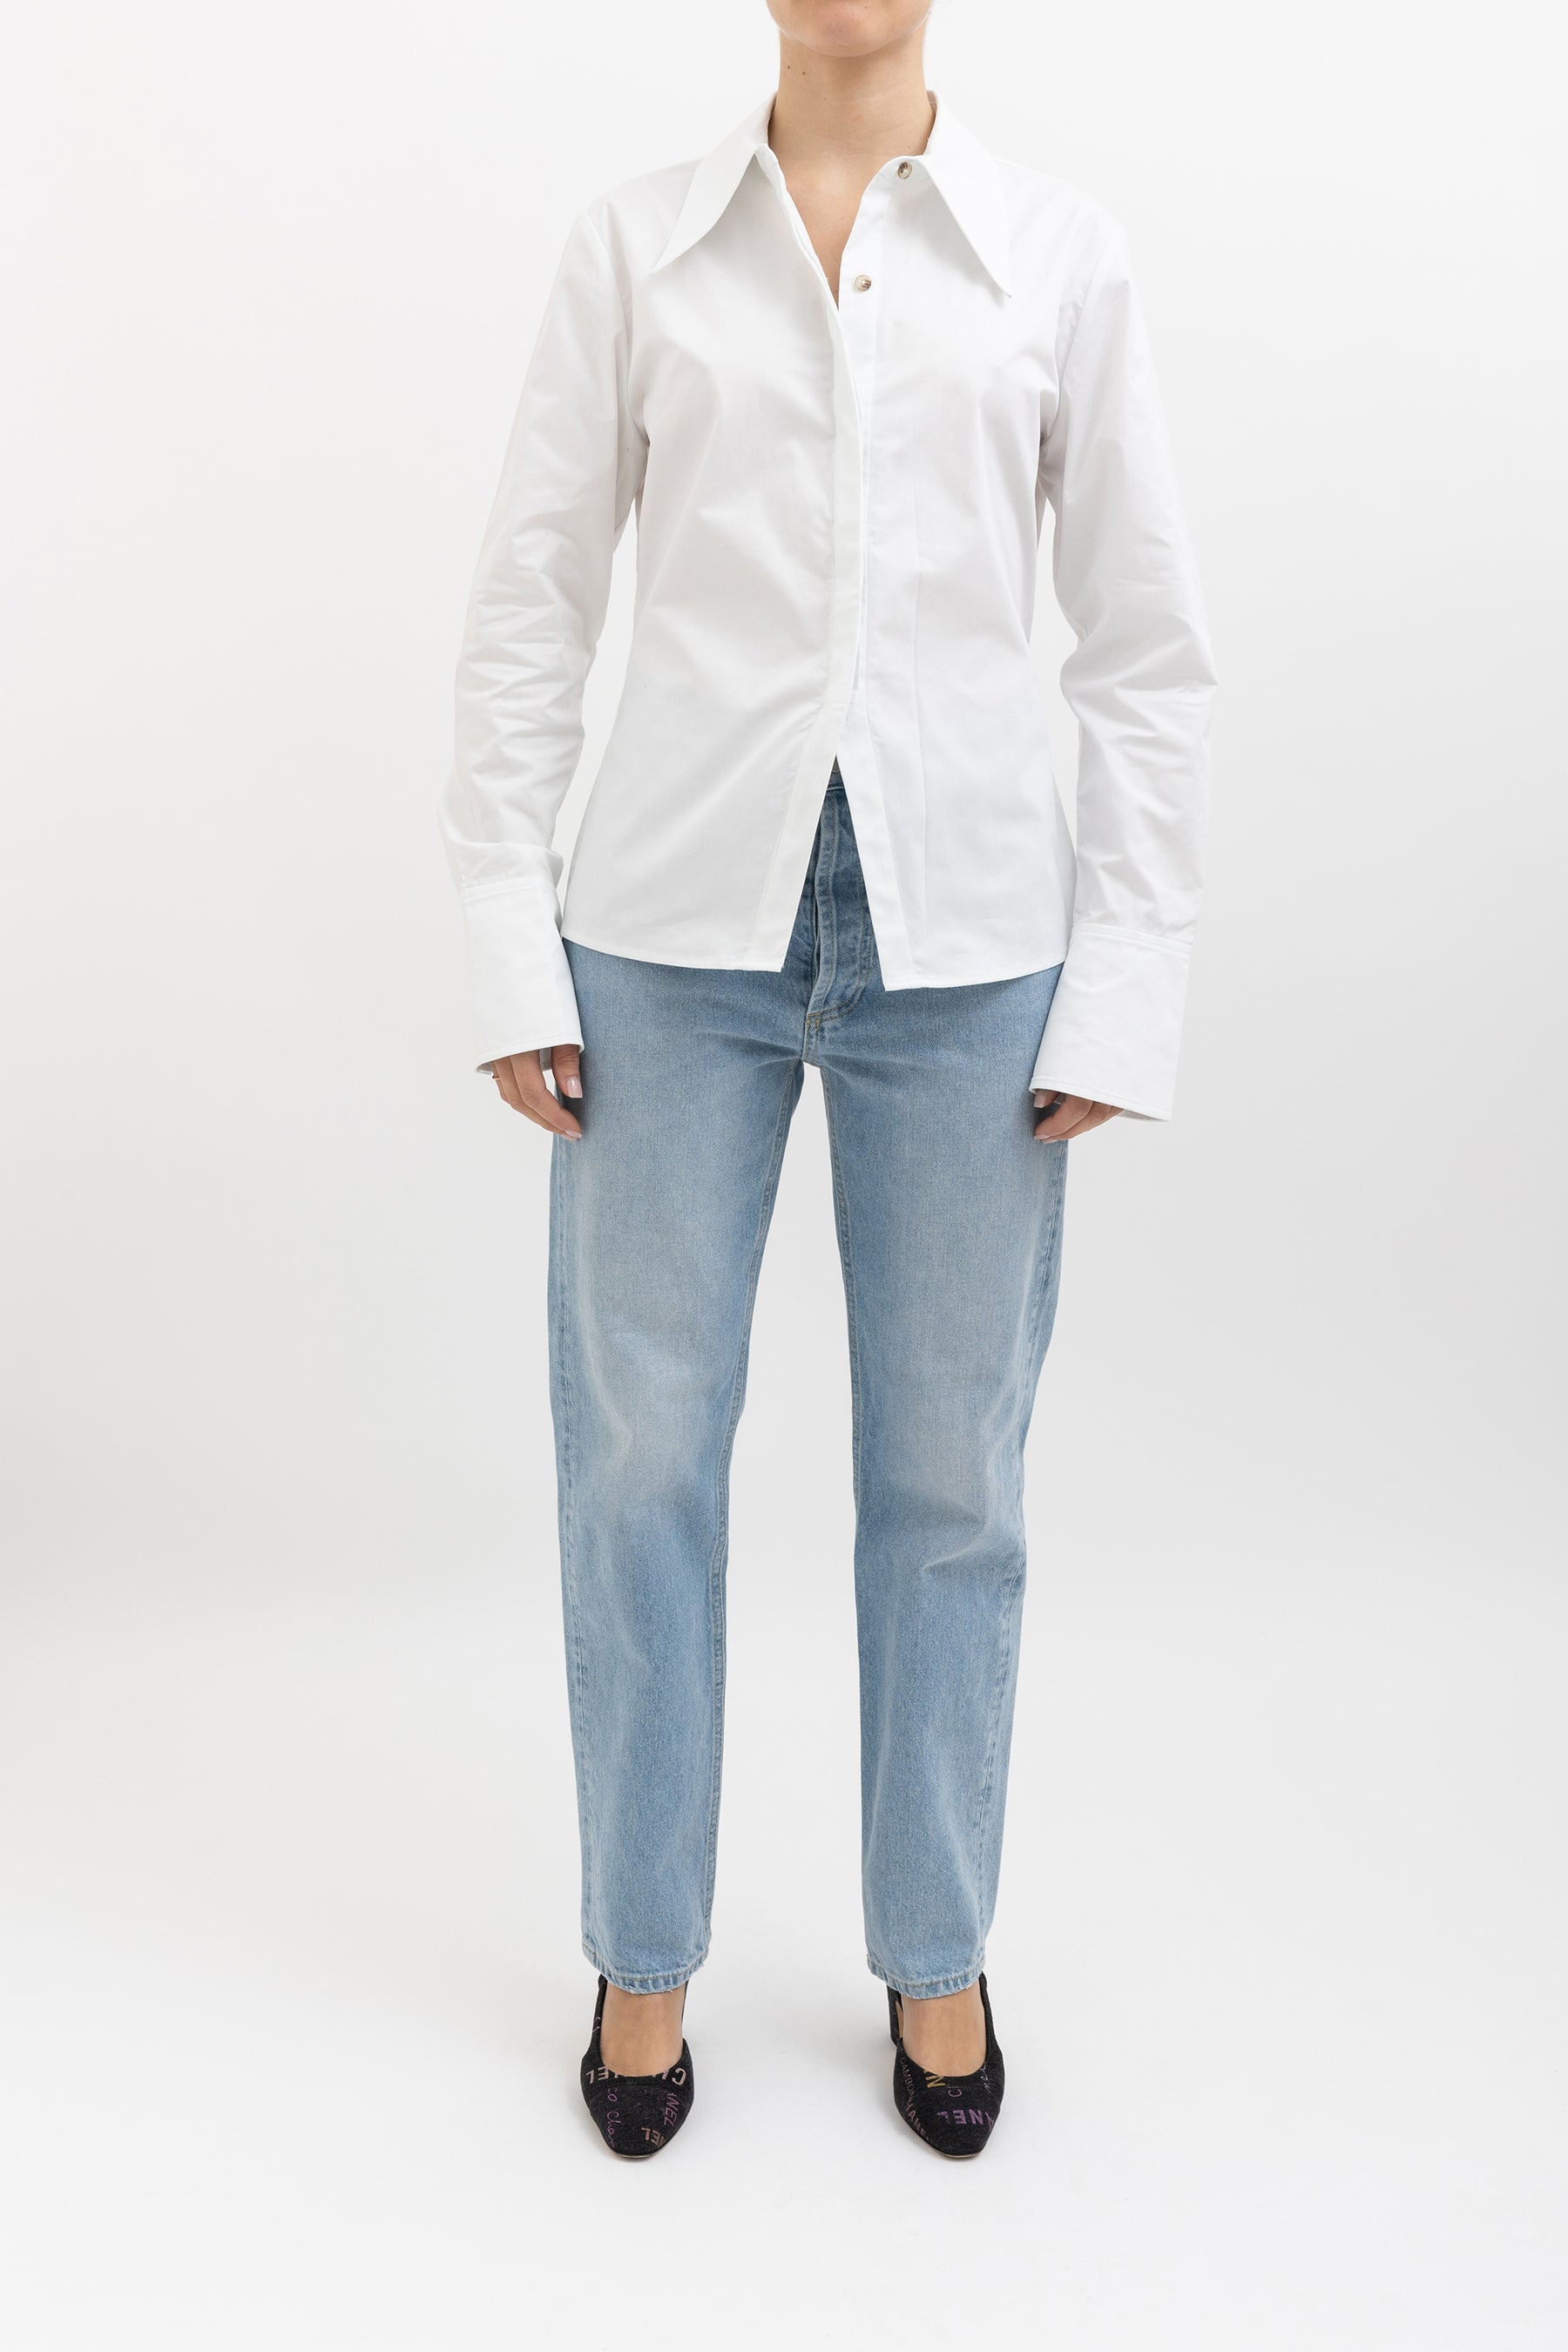 anine-bing-white-shirt-with-oversized-collar-s-0f7d